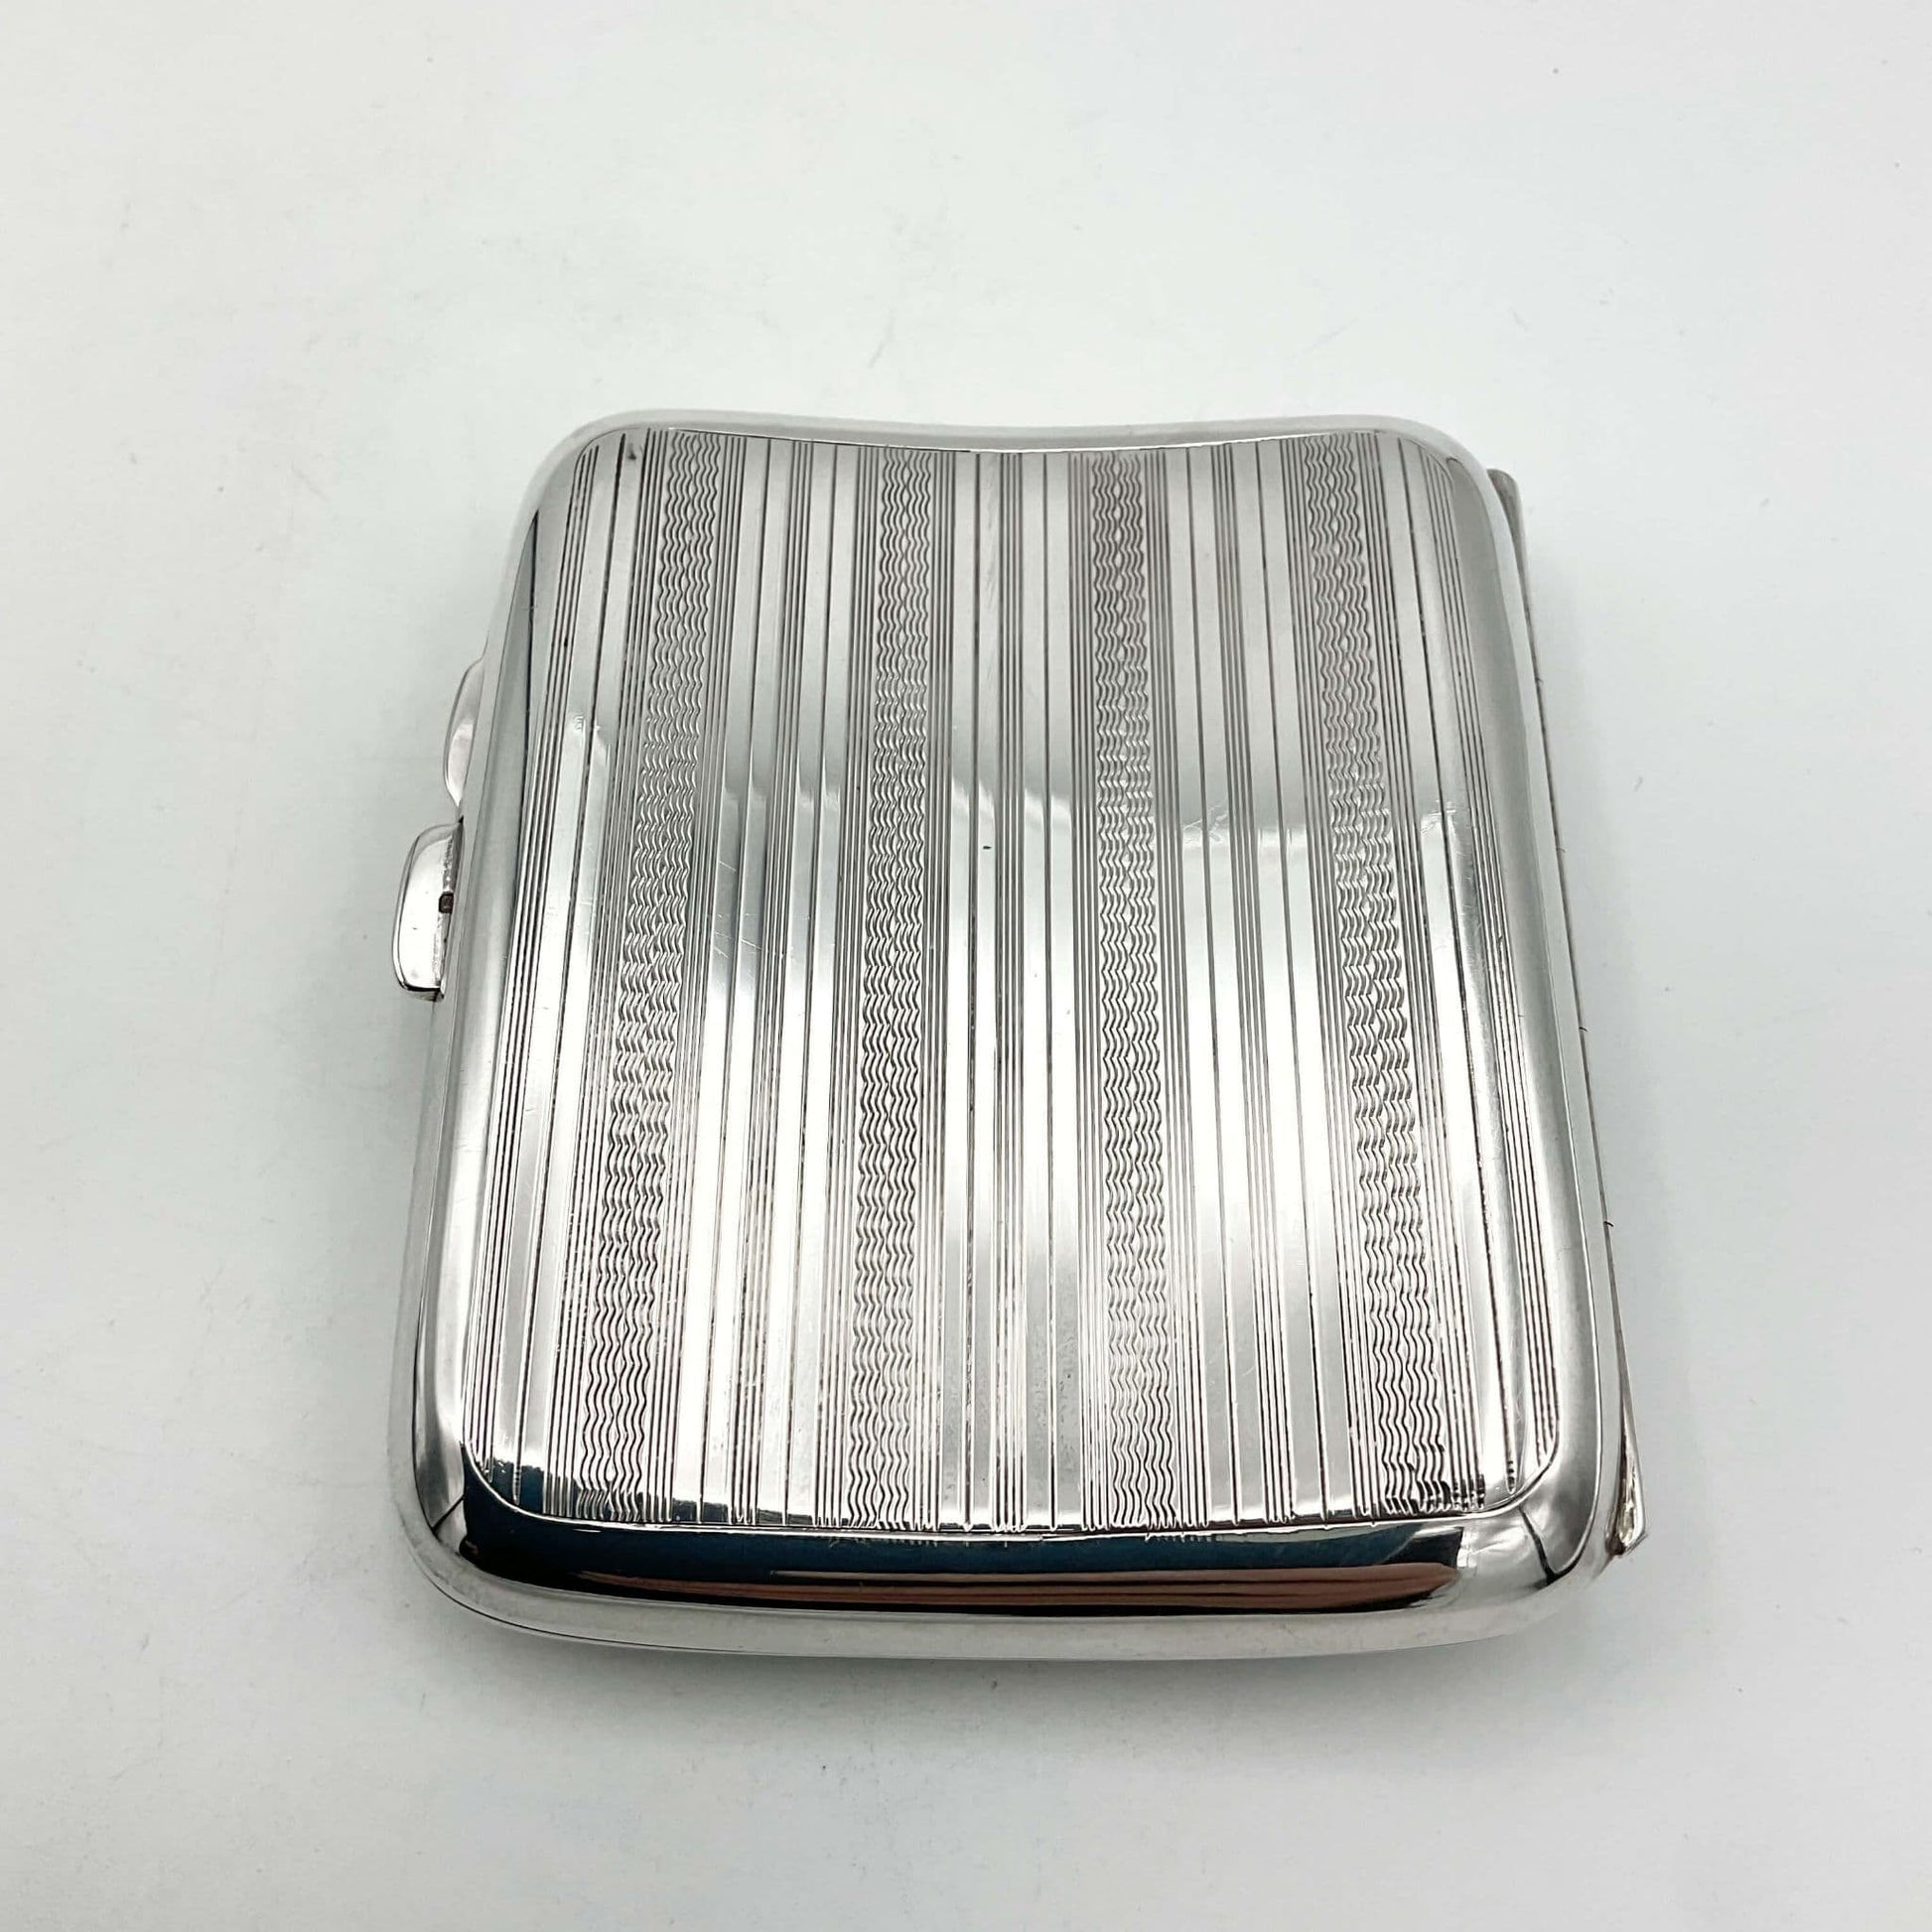 back of Antique 1920s silver cigarette case on a white background